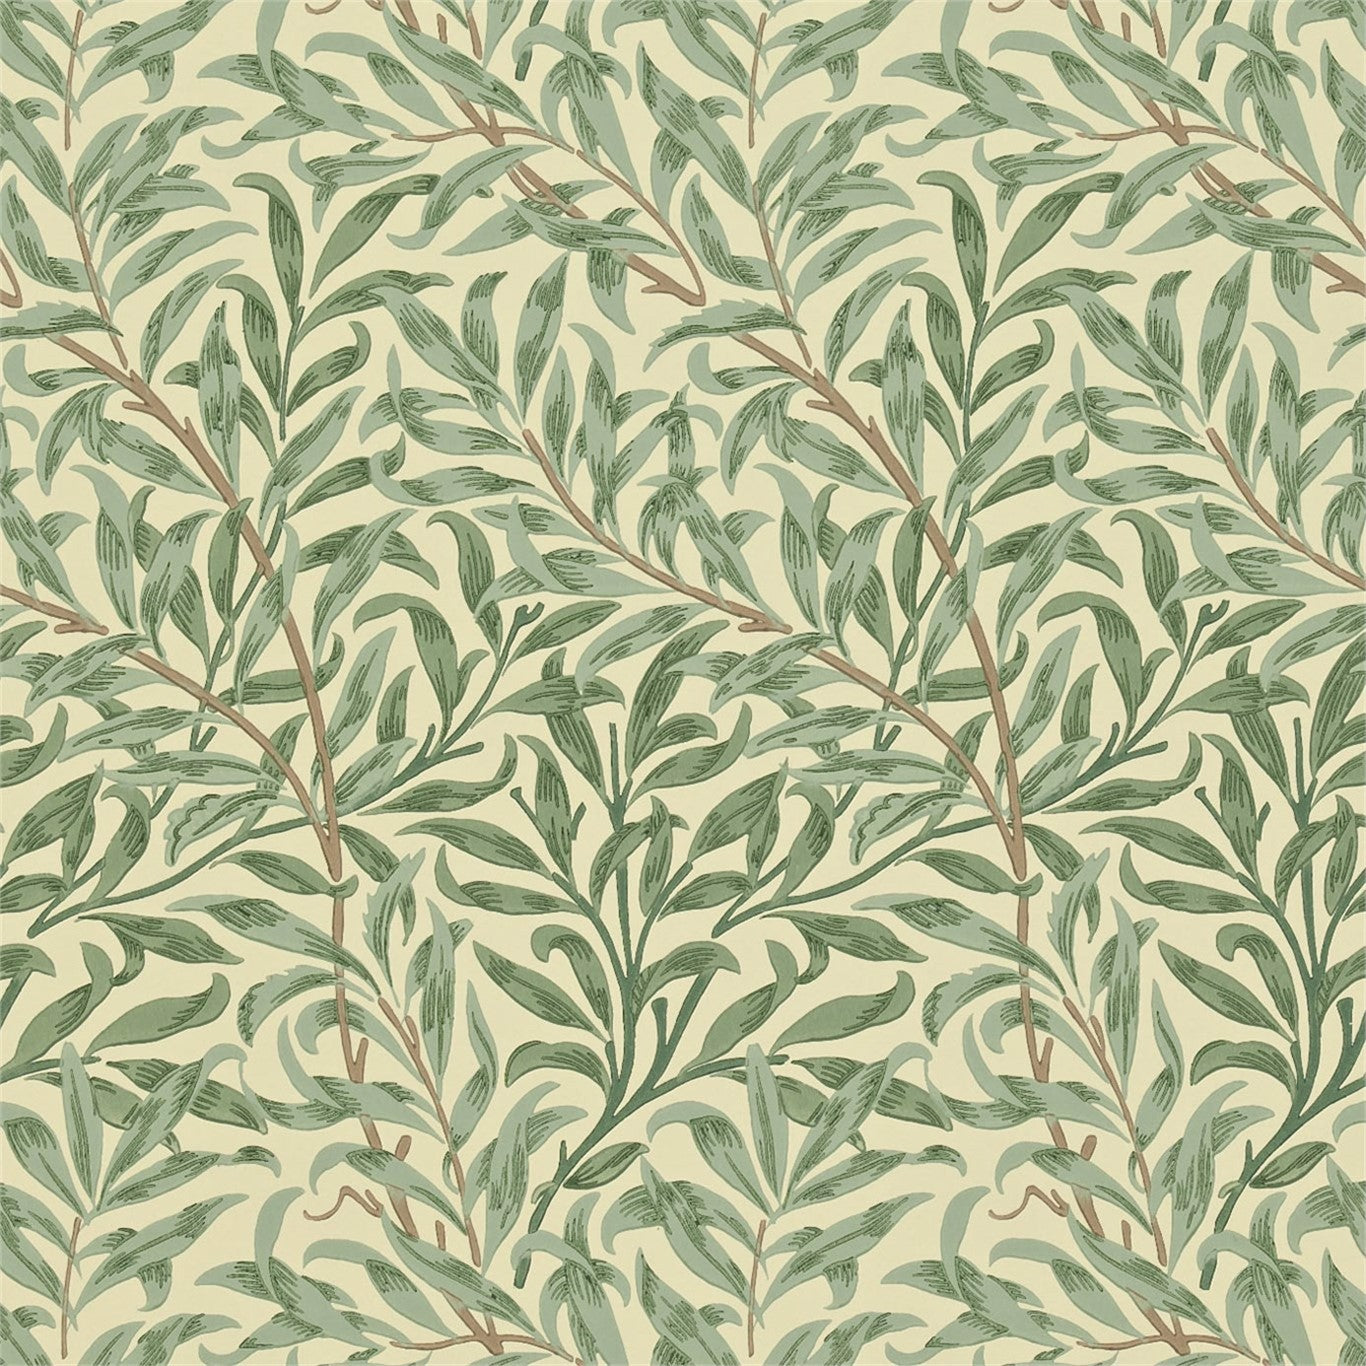 William Morris Willow Boughs Wallpaper DGW1WB101 by Morris & Co